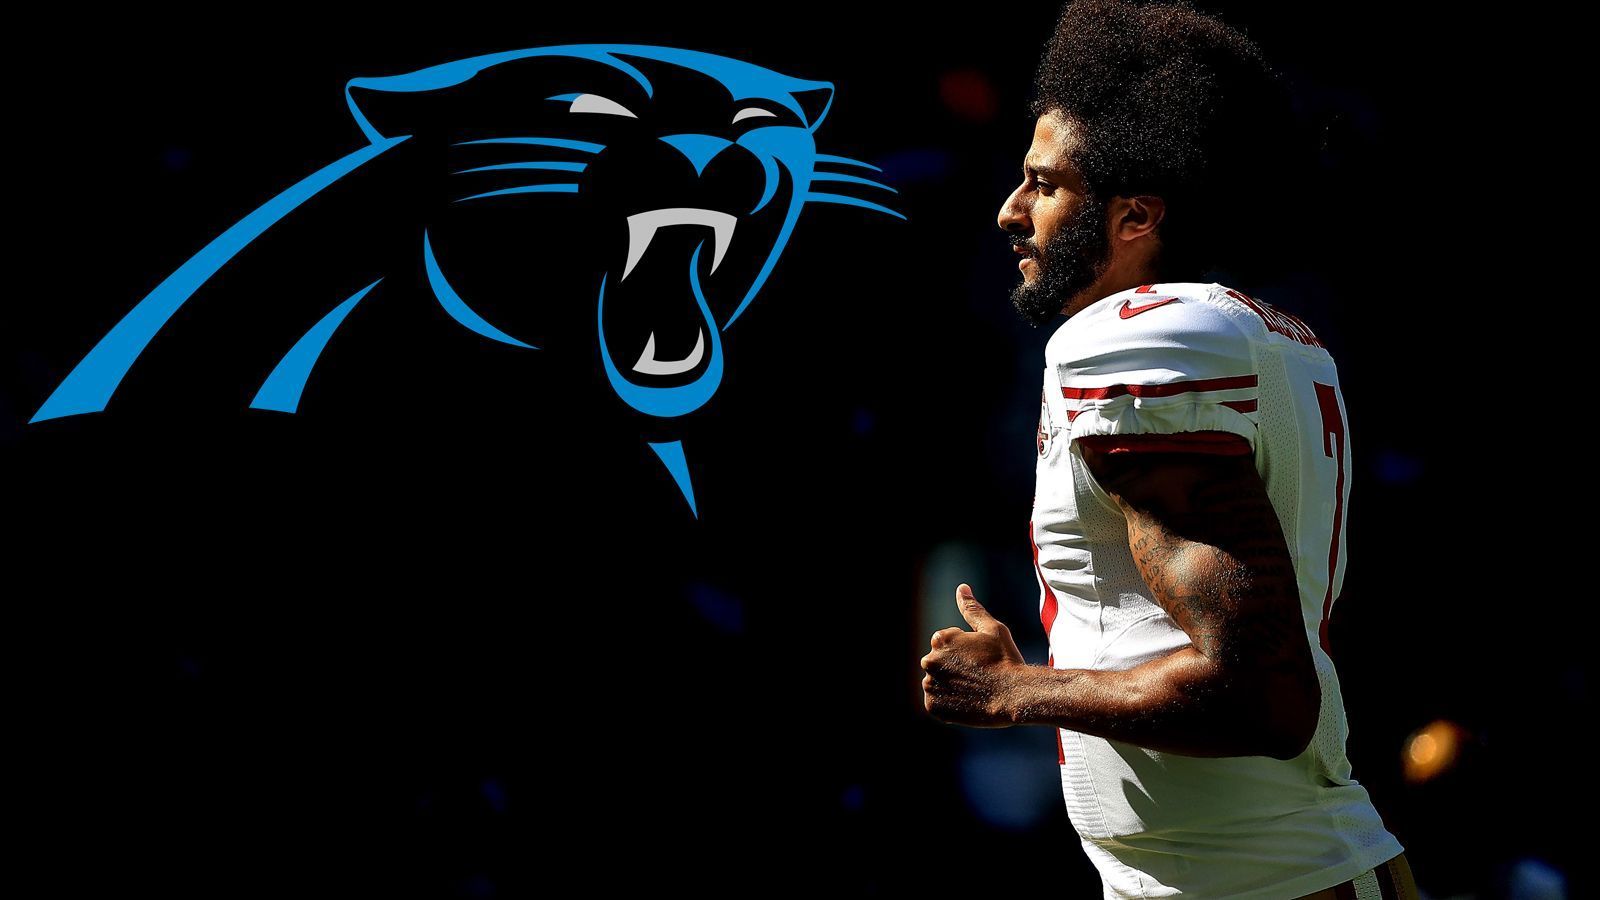 
                <strong>Platz 6: Carolina Panthers</strong><br>
                Wettquote: 15:1
              